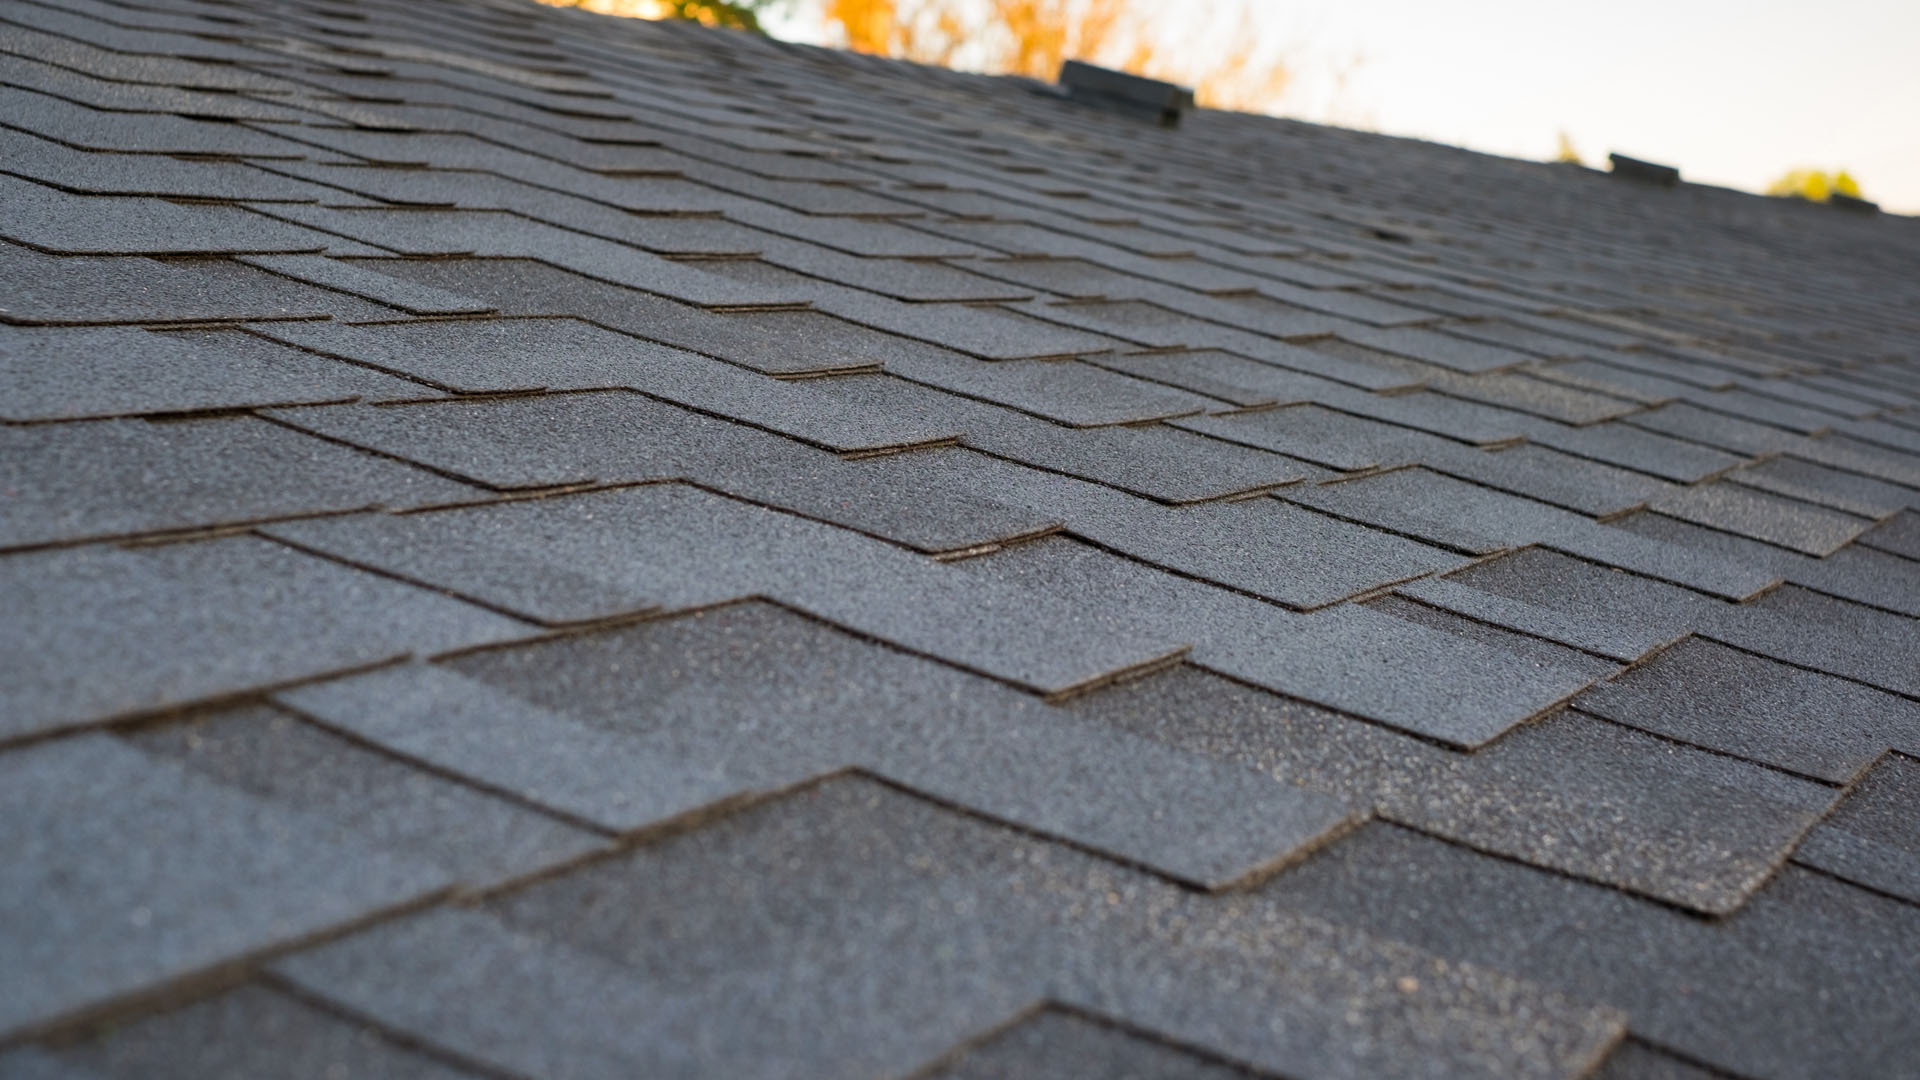 HOW ROOF CLEANING CAN INCREASE THE VALUE OF YOUR HOME